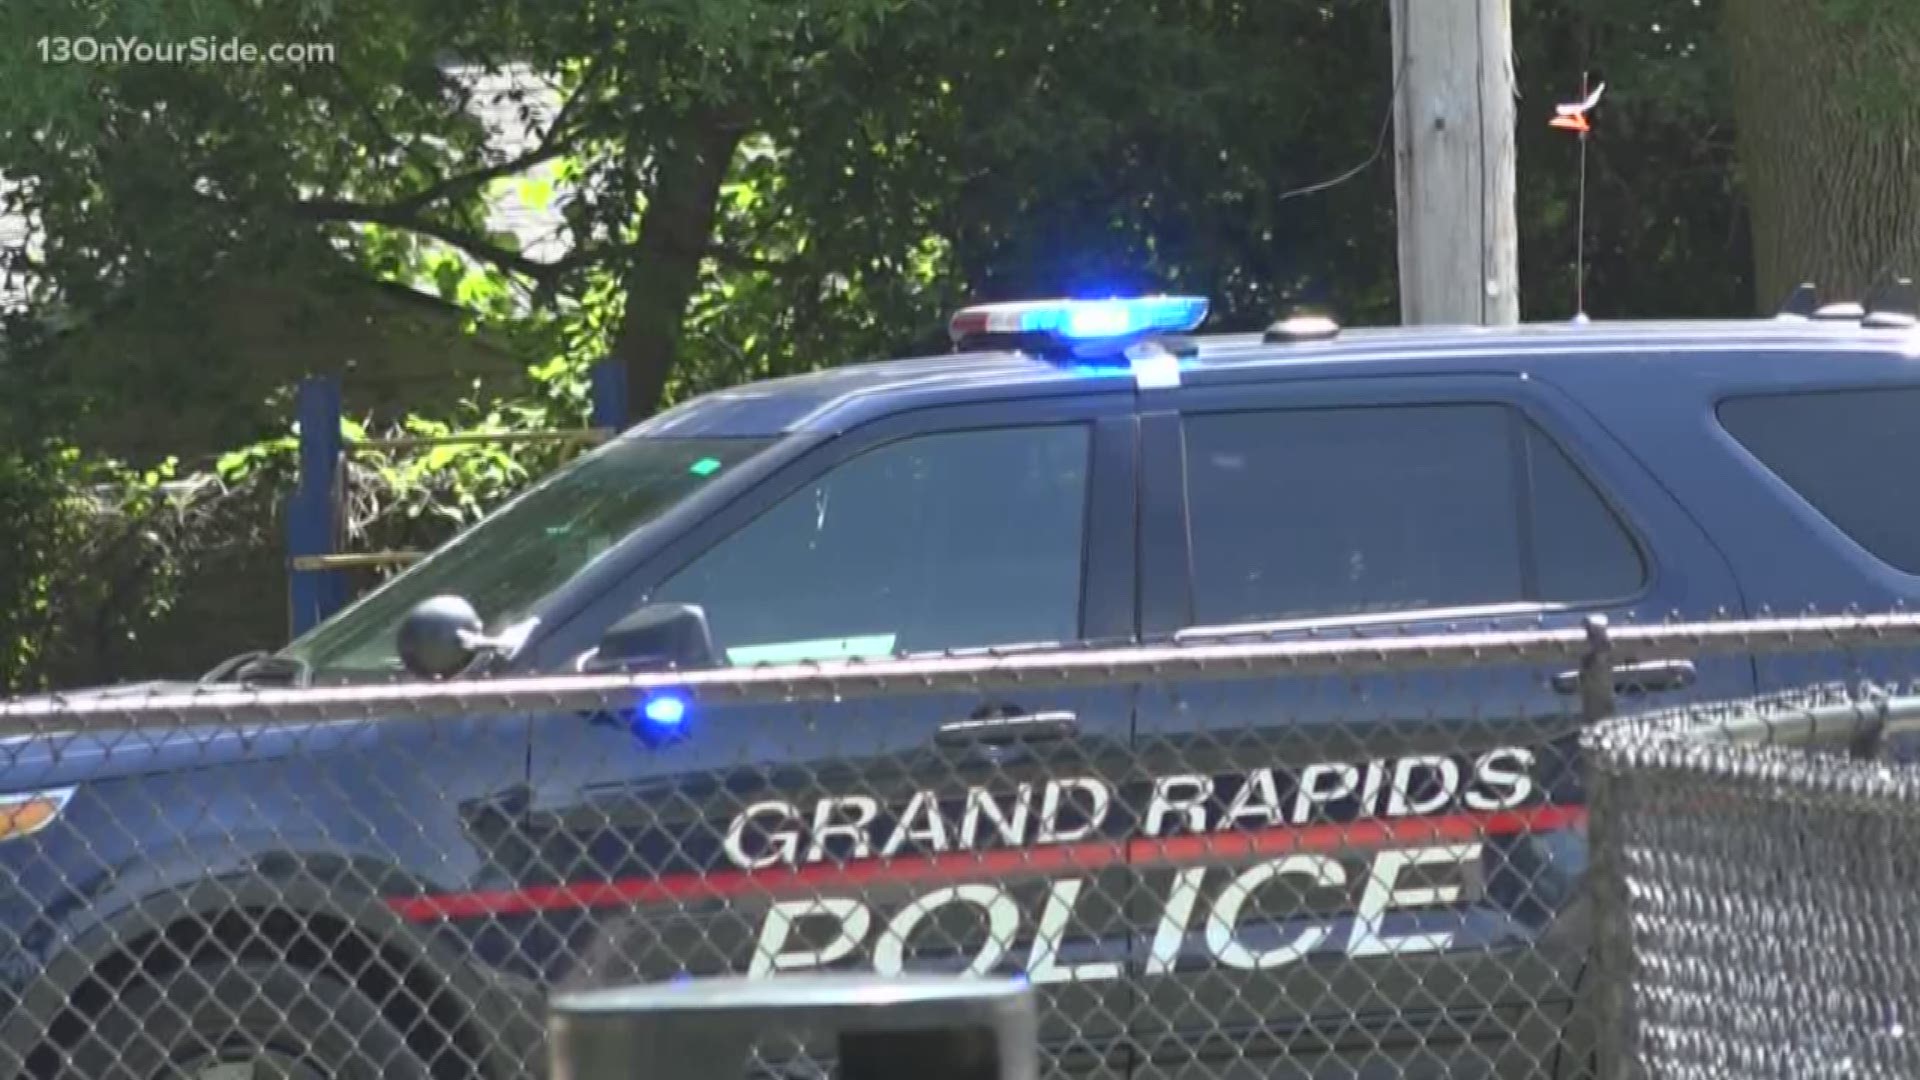 GRPD is thanking the community for their help.